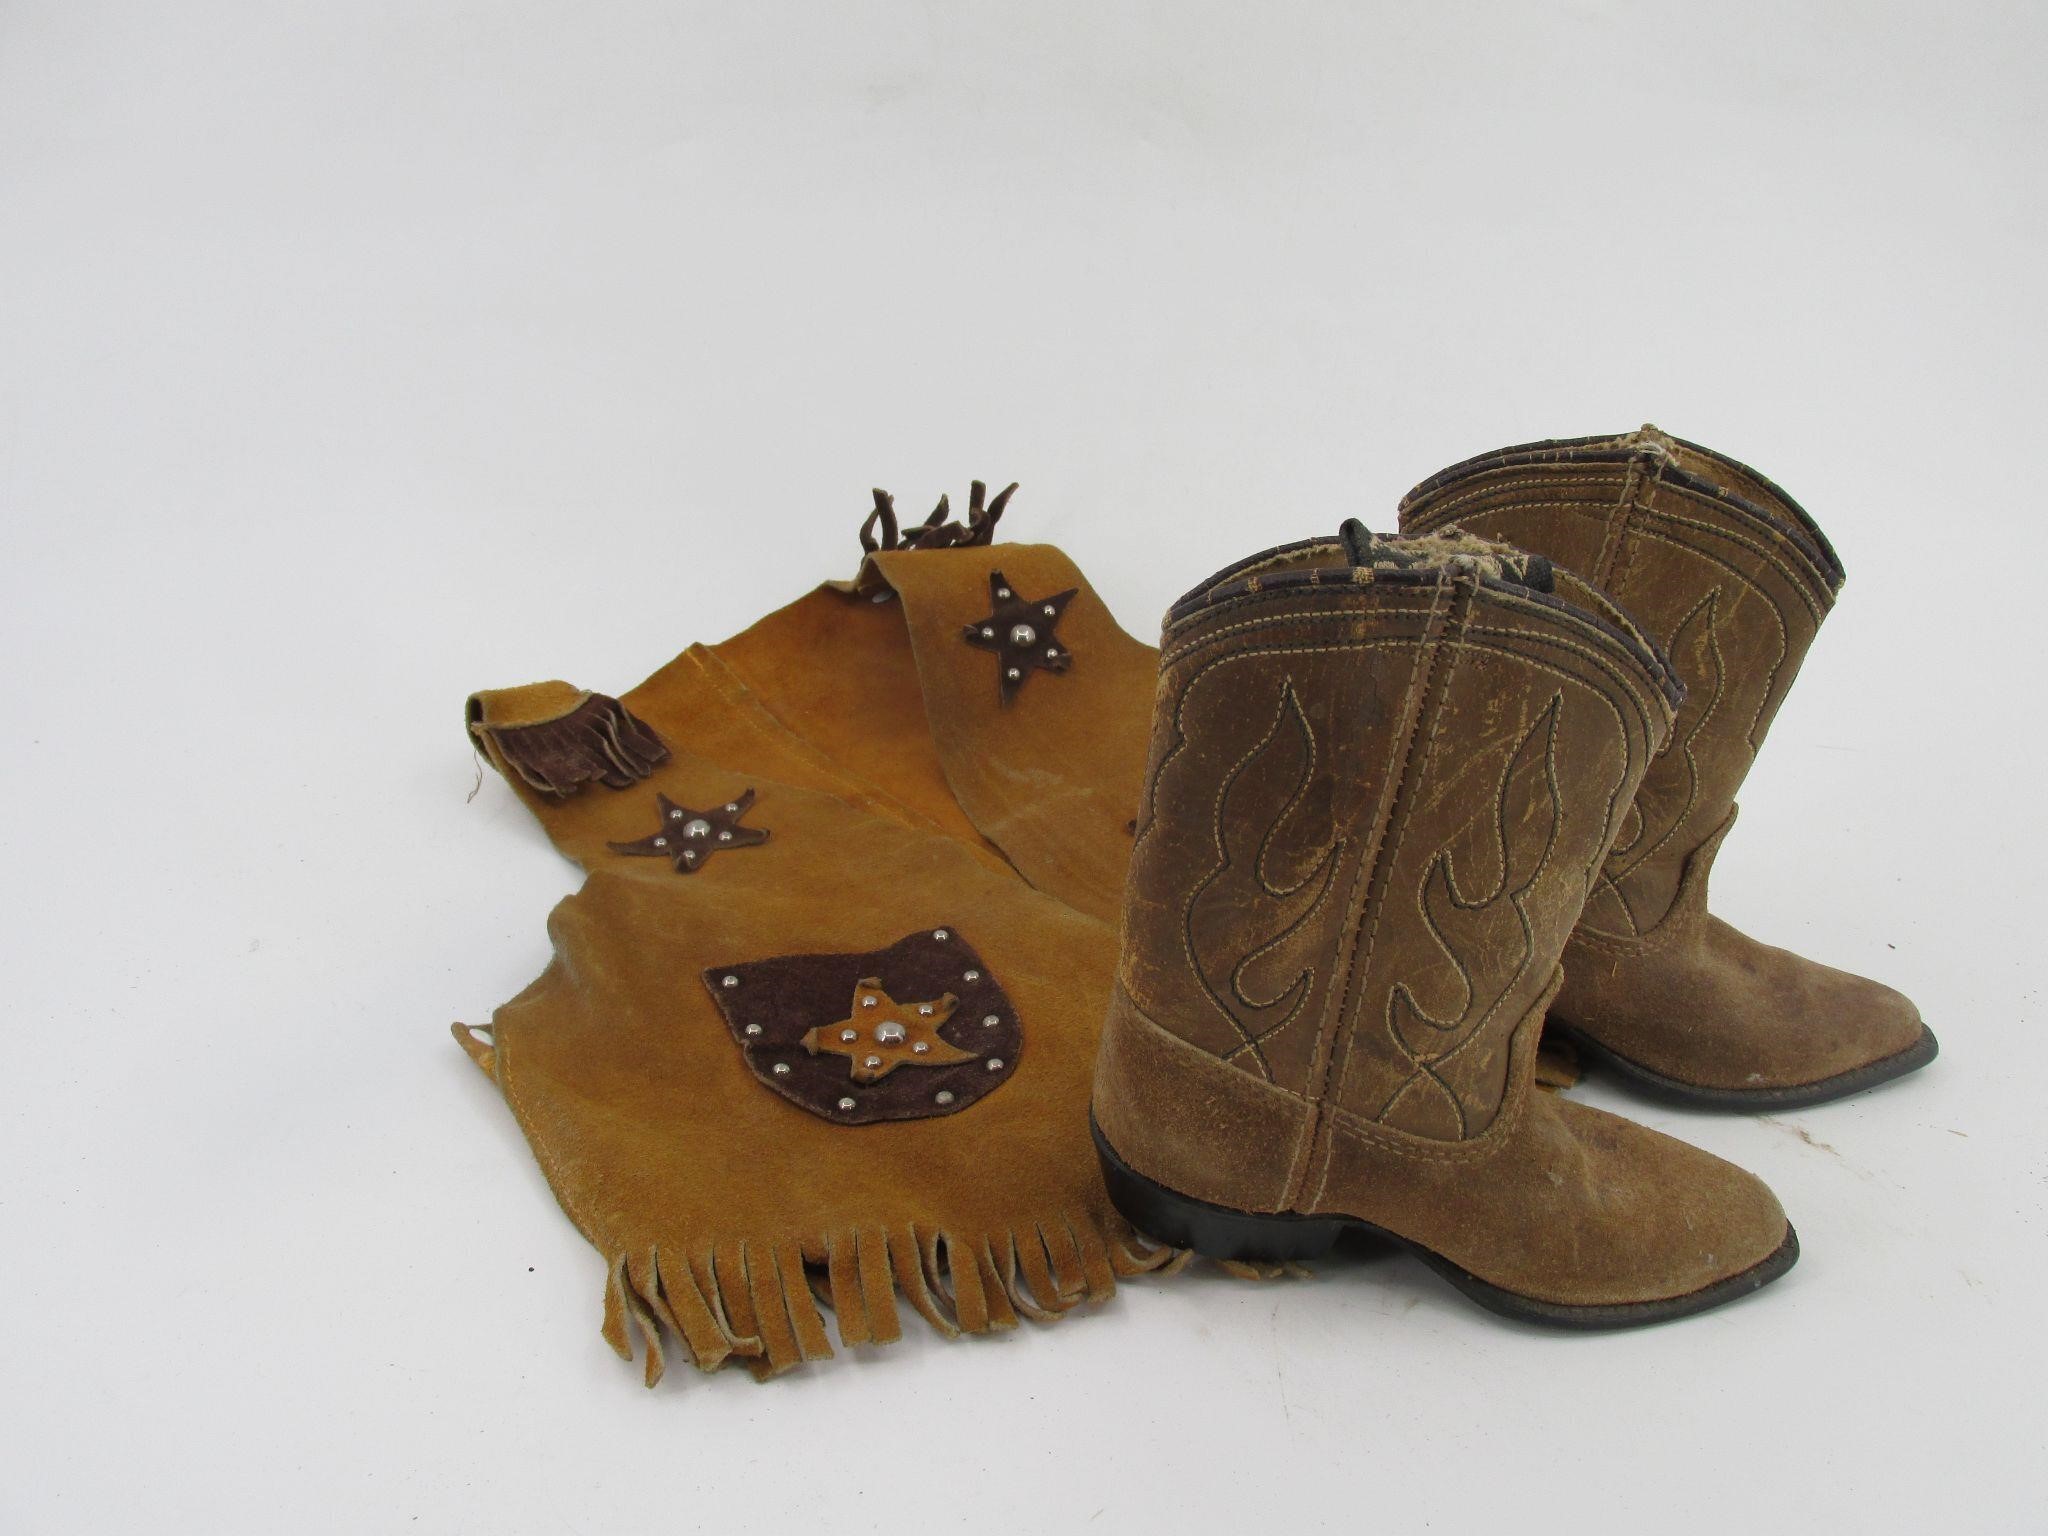 Kids Tiny Cowboy Boots and Leather Sherrif Vest